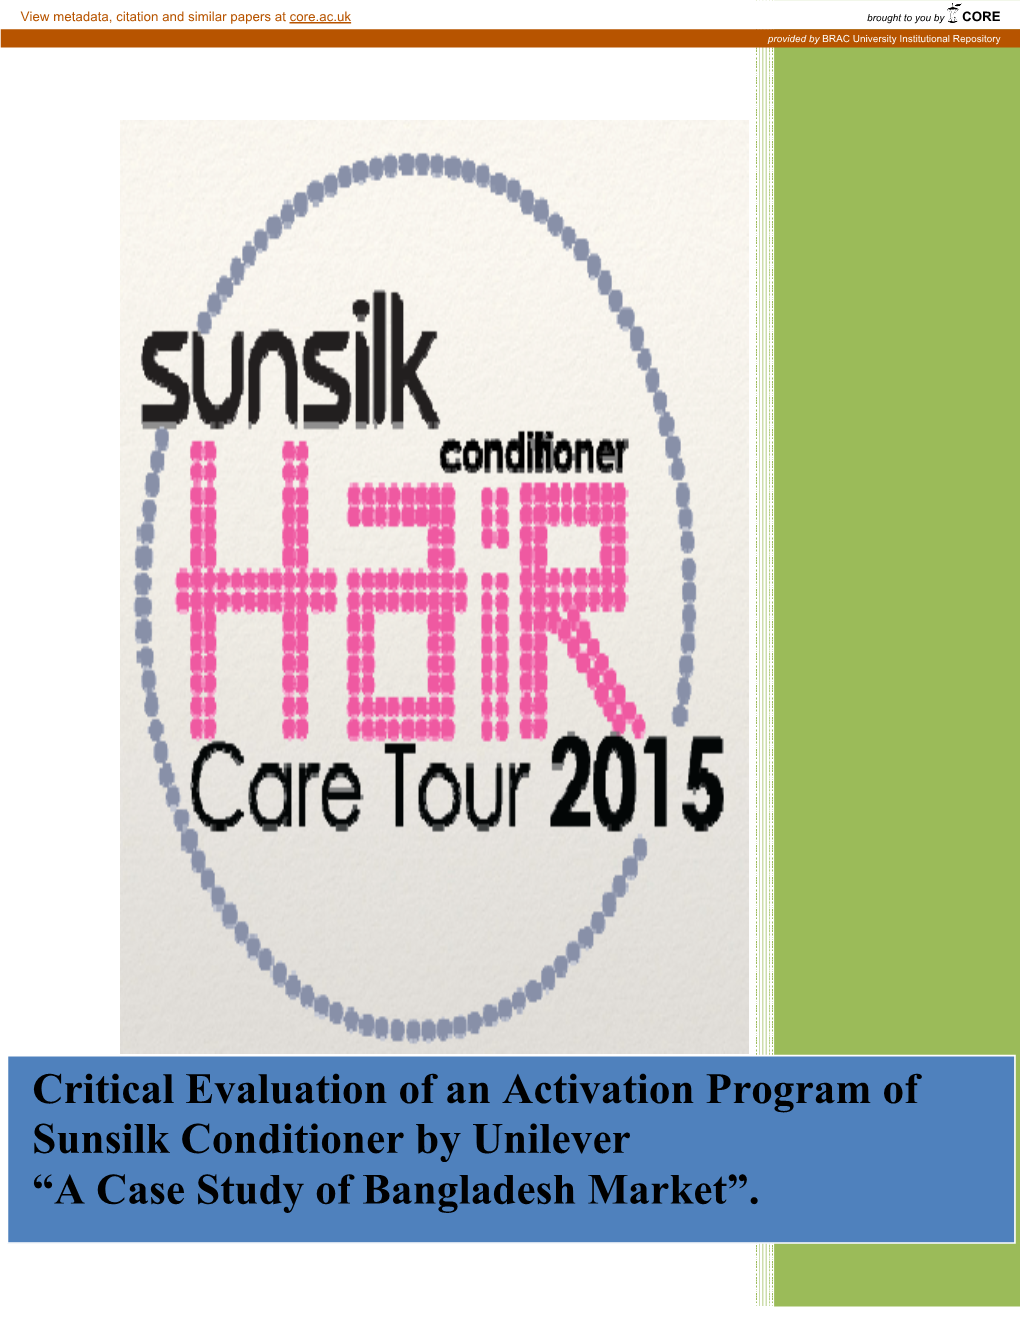 Critical Evaluation of an Activation Program of Sunsilk Conditioner by Unilever “A Case Study of Bangladesh Market”